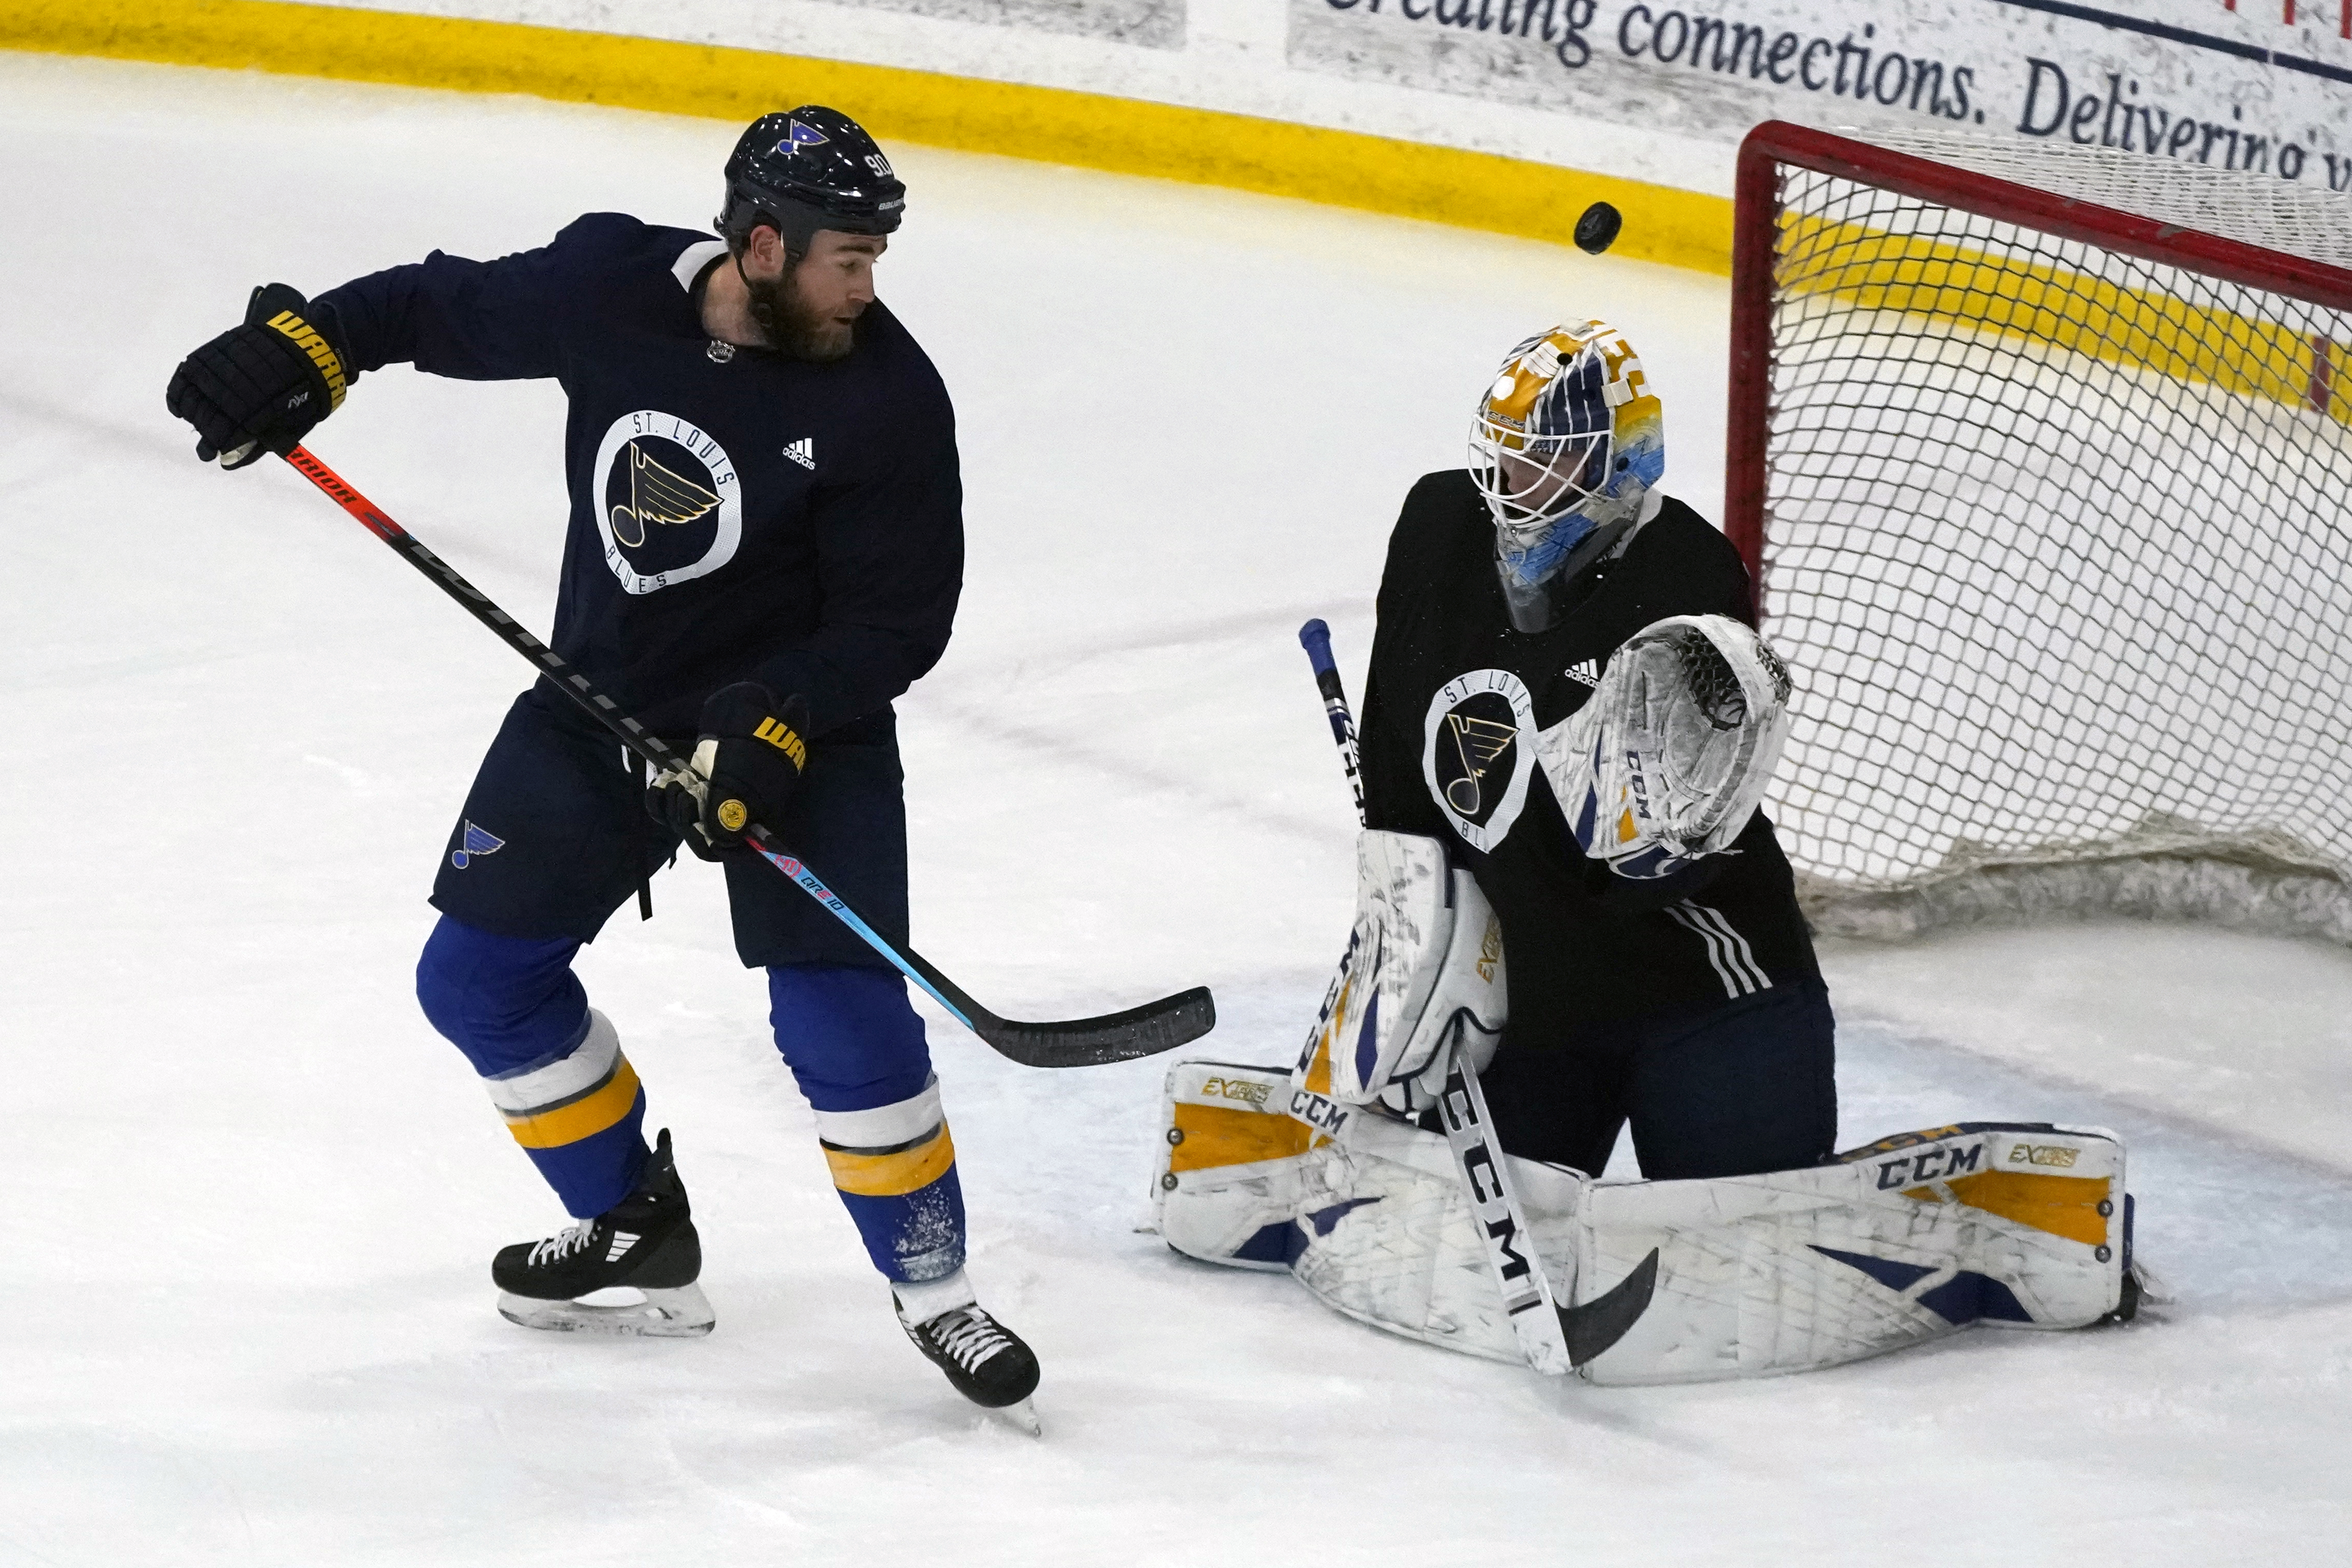 St. Louis Blues Roster Is Even More Volatile Than The Schedule